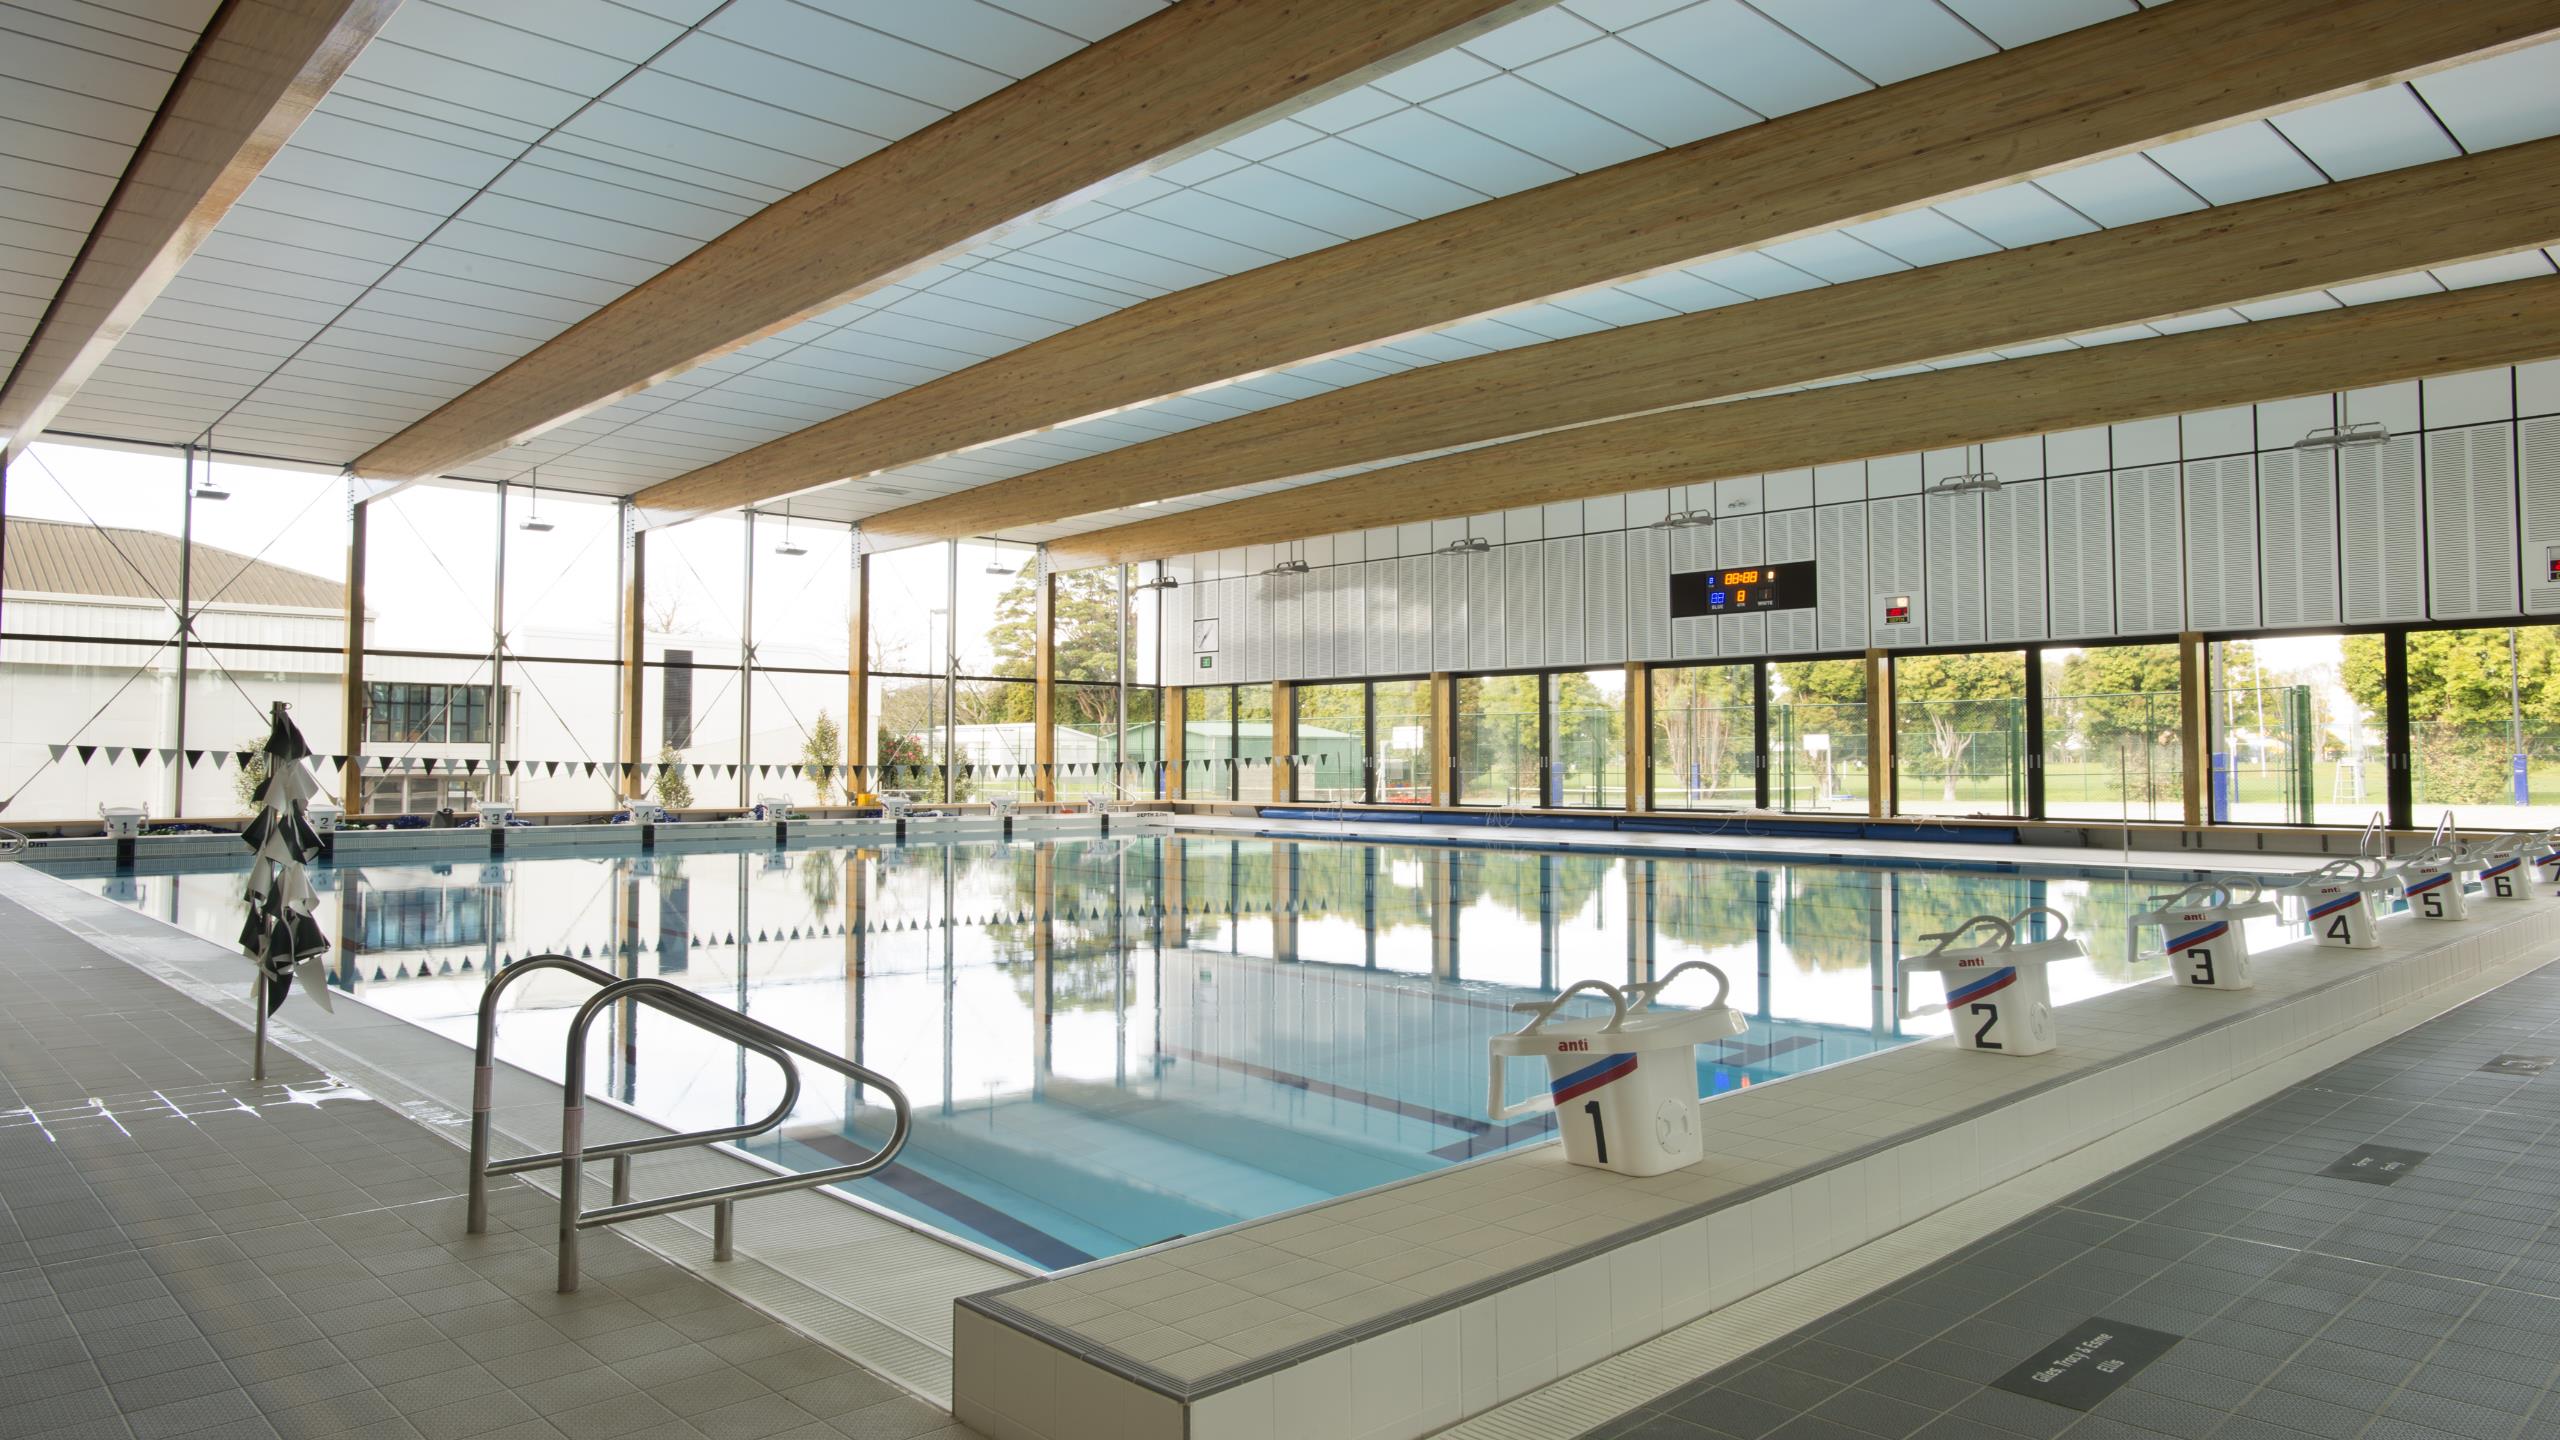 St Cuthberts Girls School swimming pool complex ceiling showing Triton Cloud pool panels installed